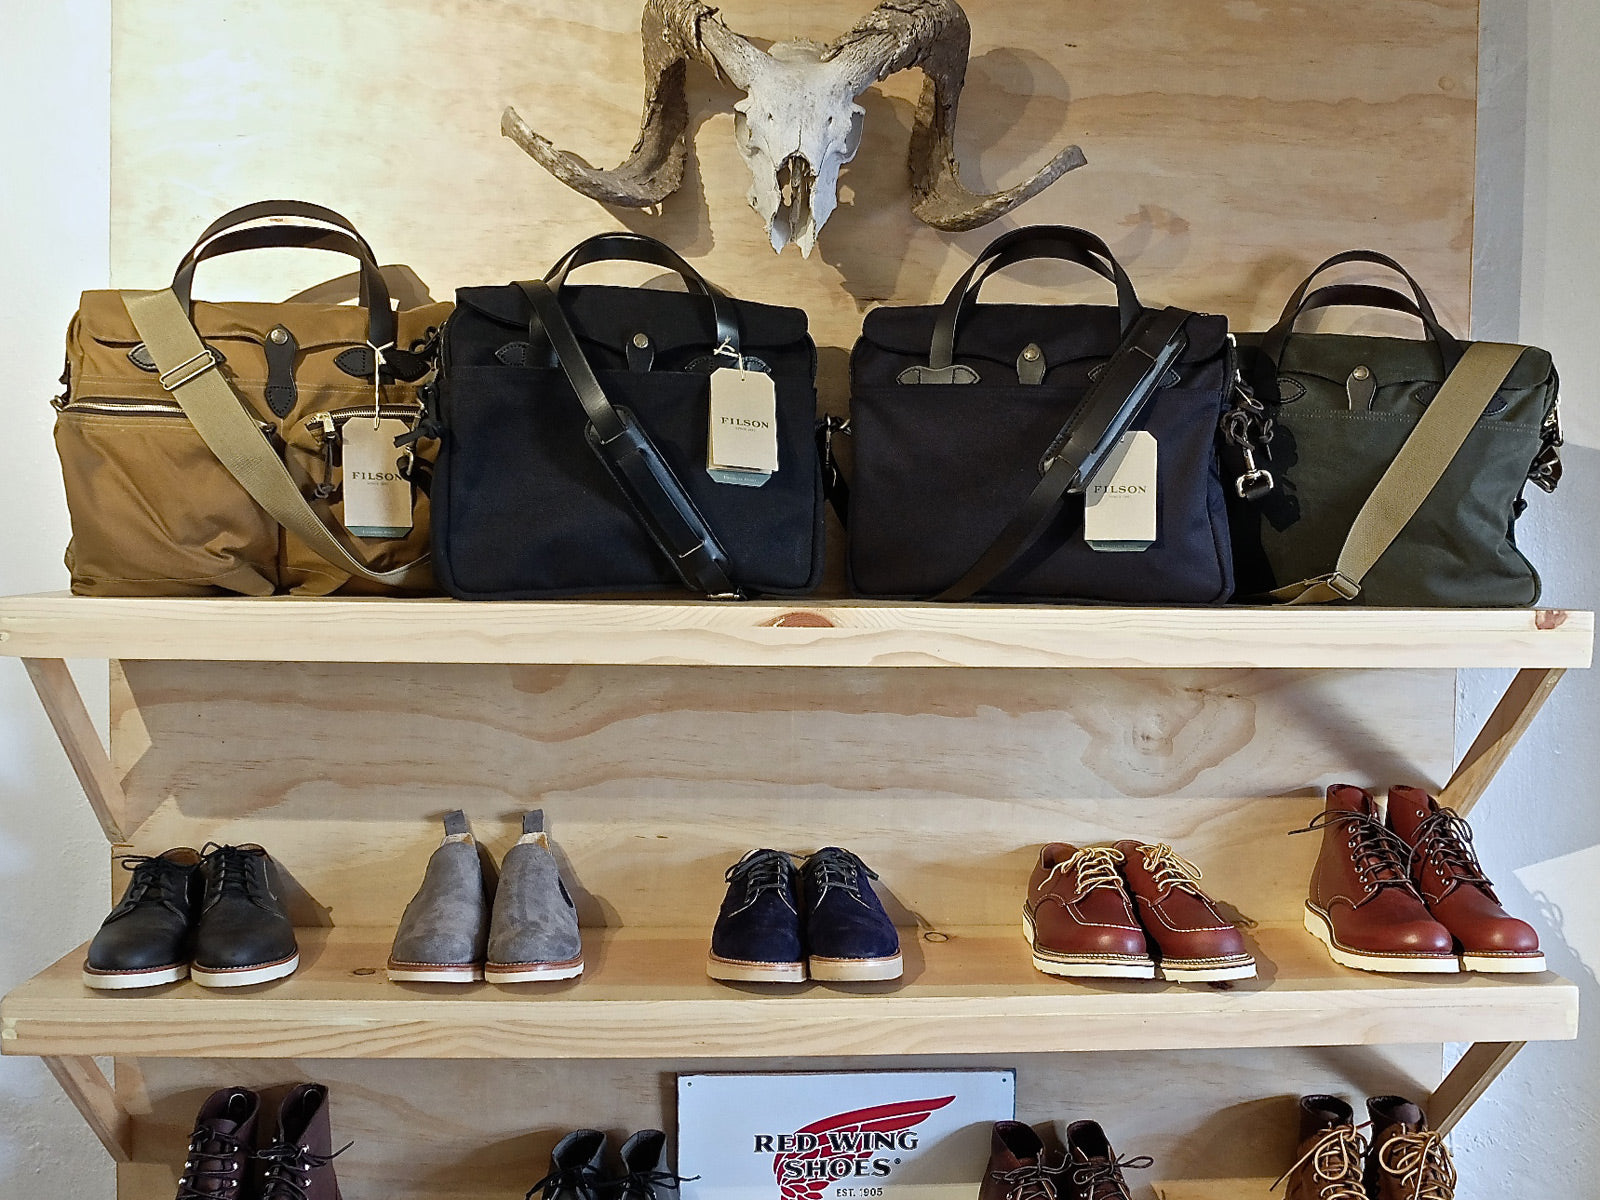 Wooden racks displaying Red Wing shoes and Filson bags beneath a cow's skull.